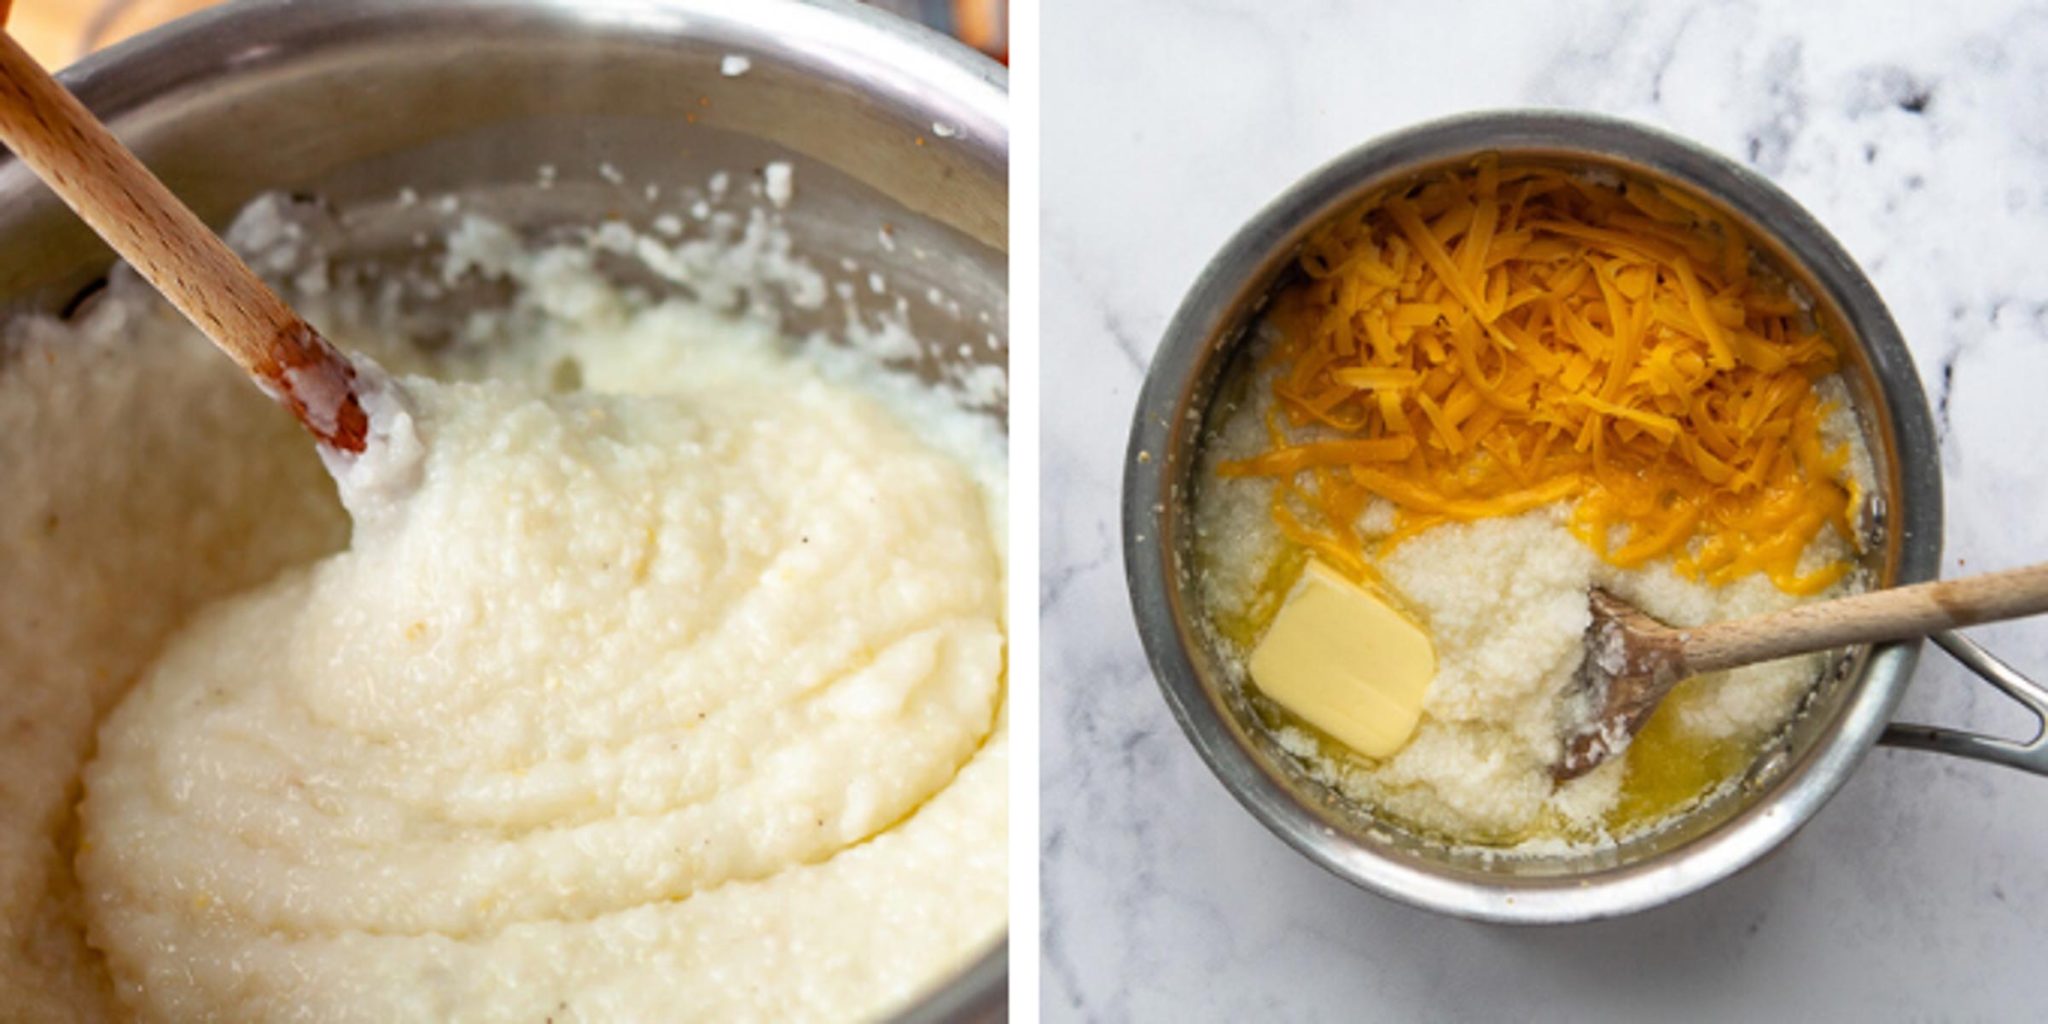 images showing how to make the grits